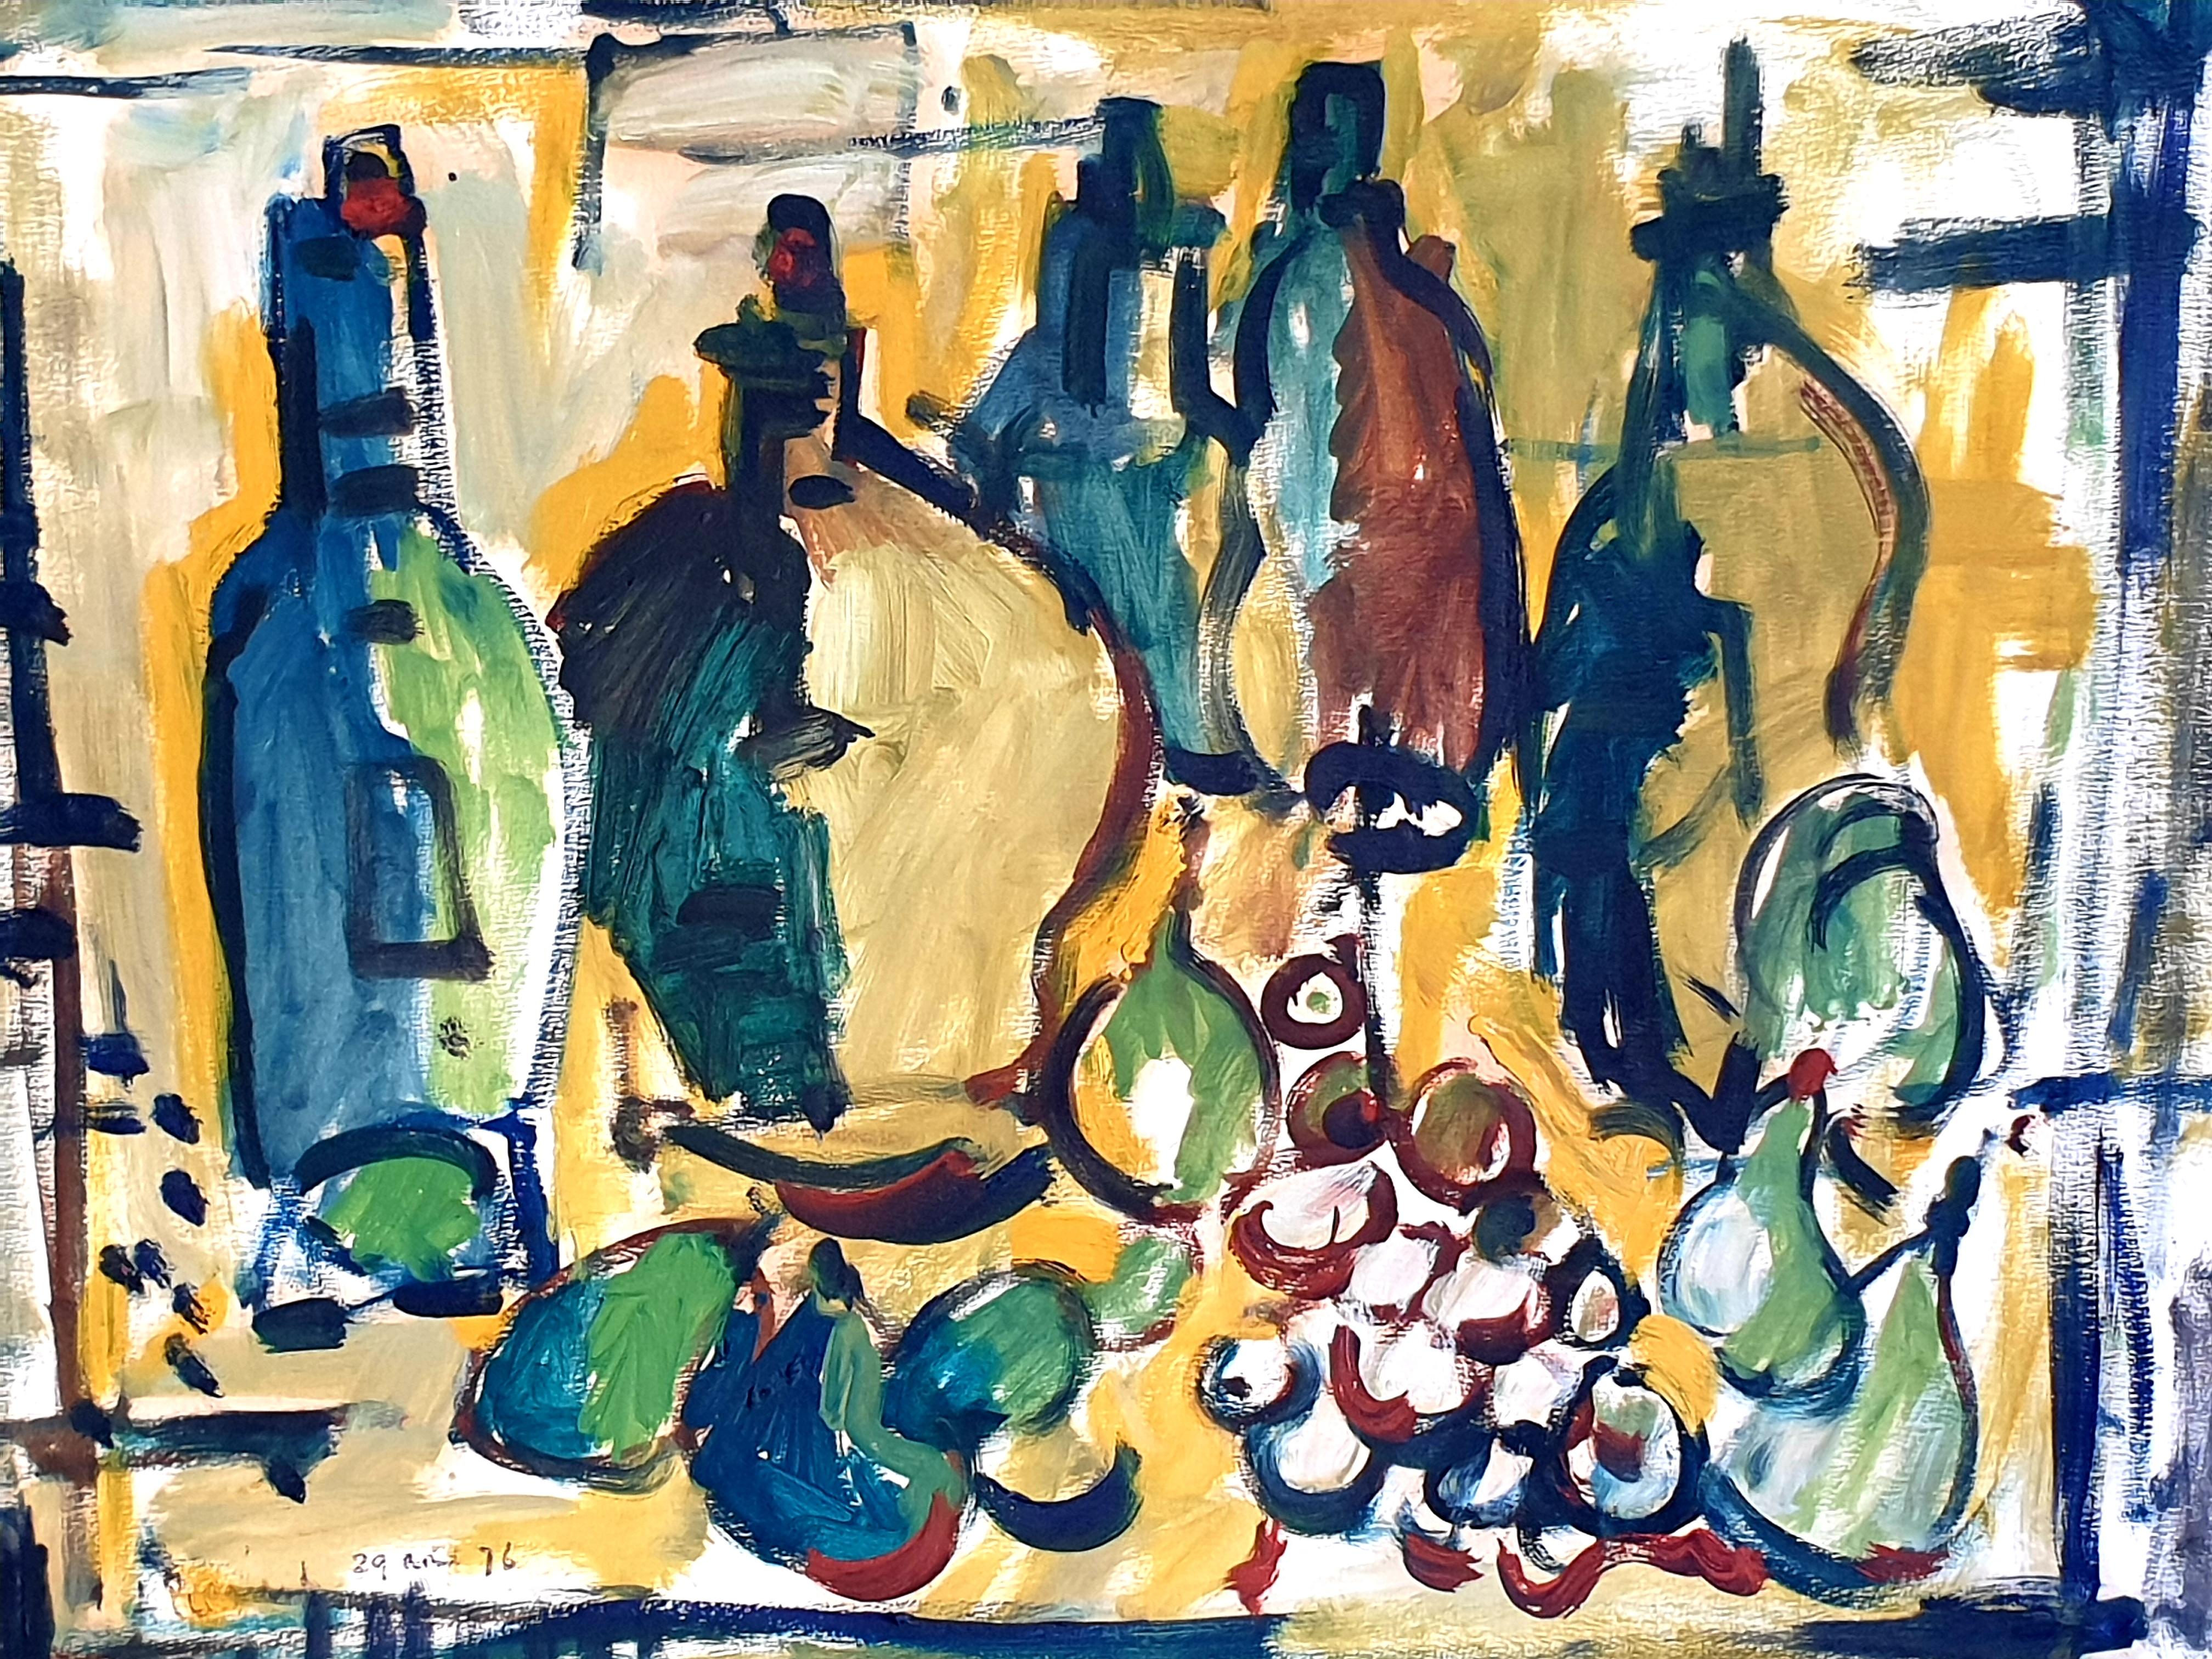 1970s Belgian Gouache Still Life Provençal Tablescape of Fruit and Tableware. - Painting by André Pierard